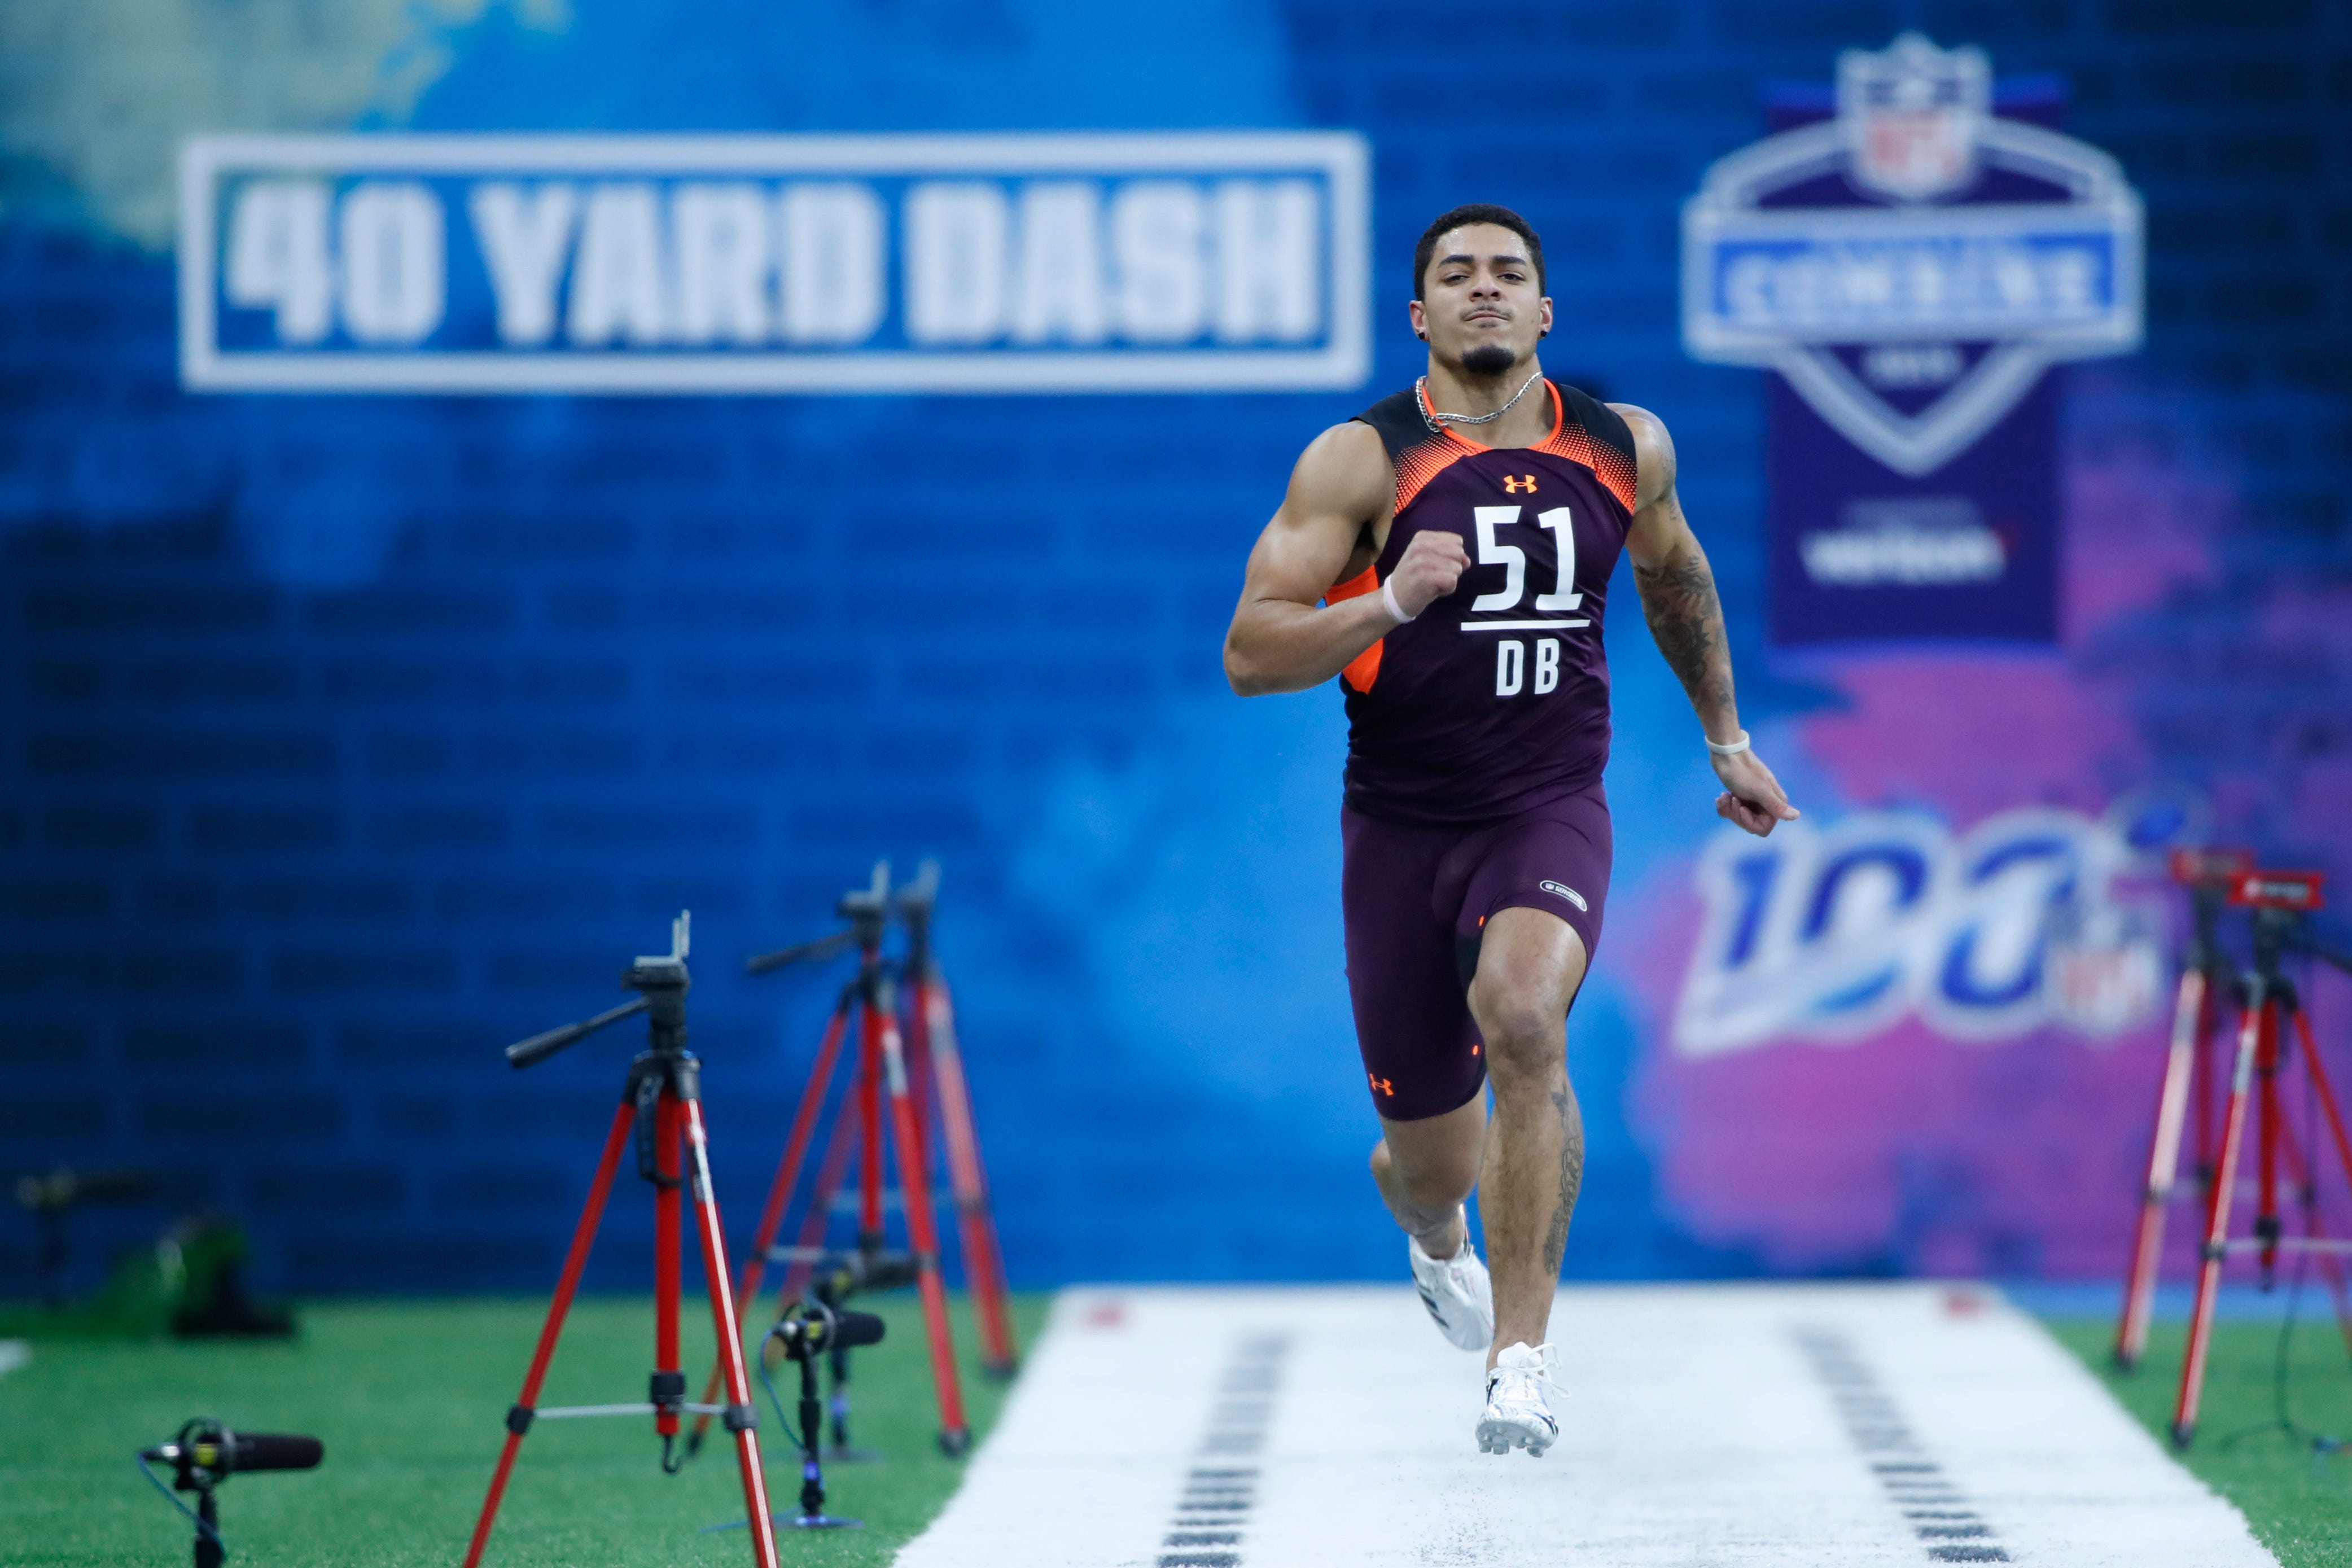 Iowa defensive back Amani Hooker runs the 40 yard dash during the 2019 NFL Combine at Lucas Oil Stadium.